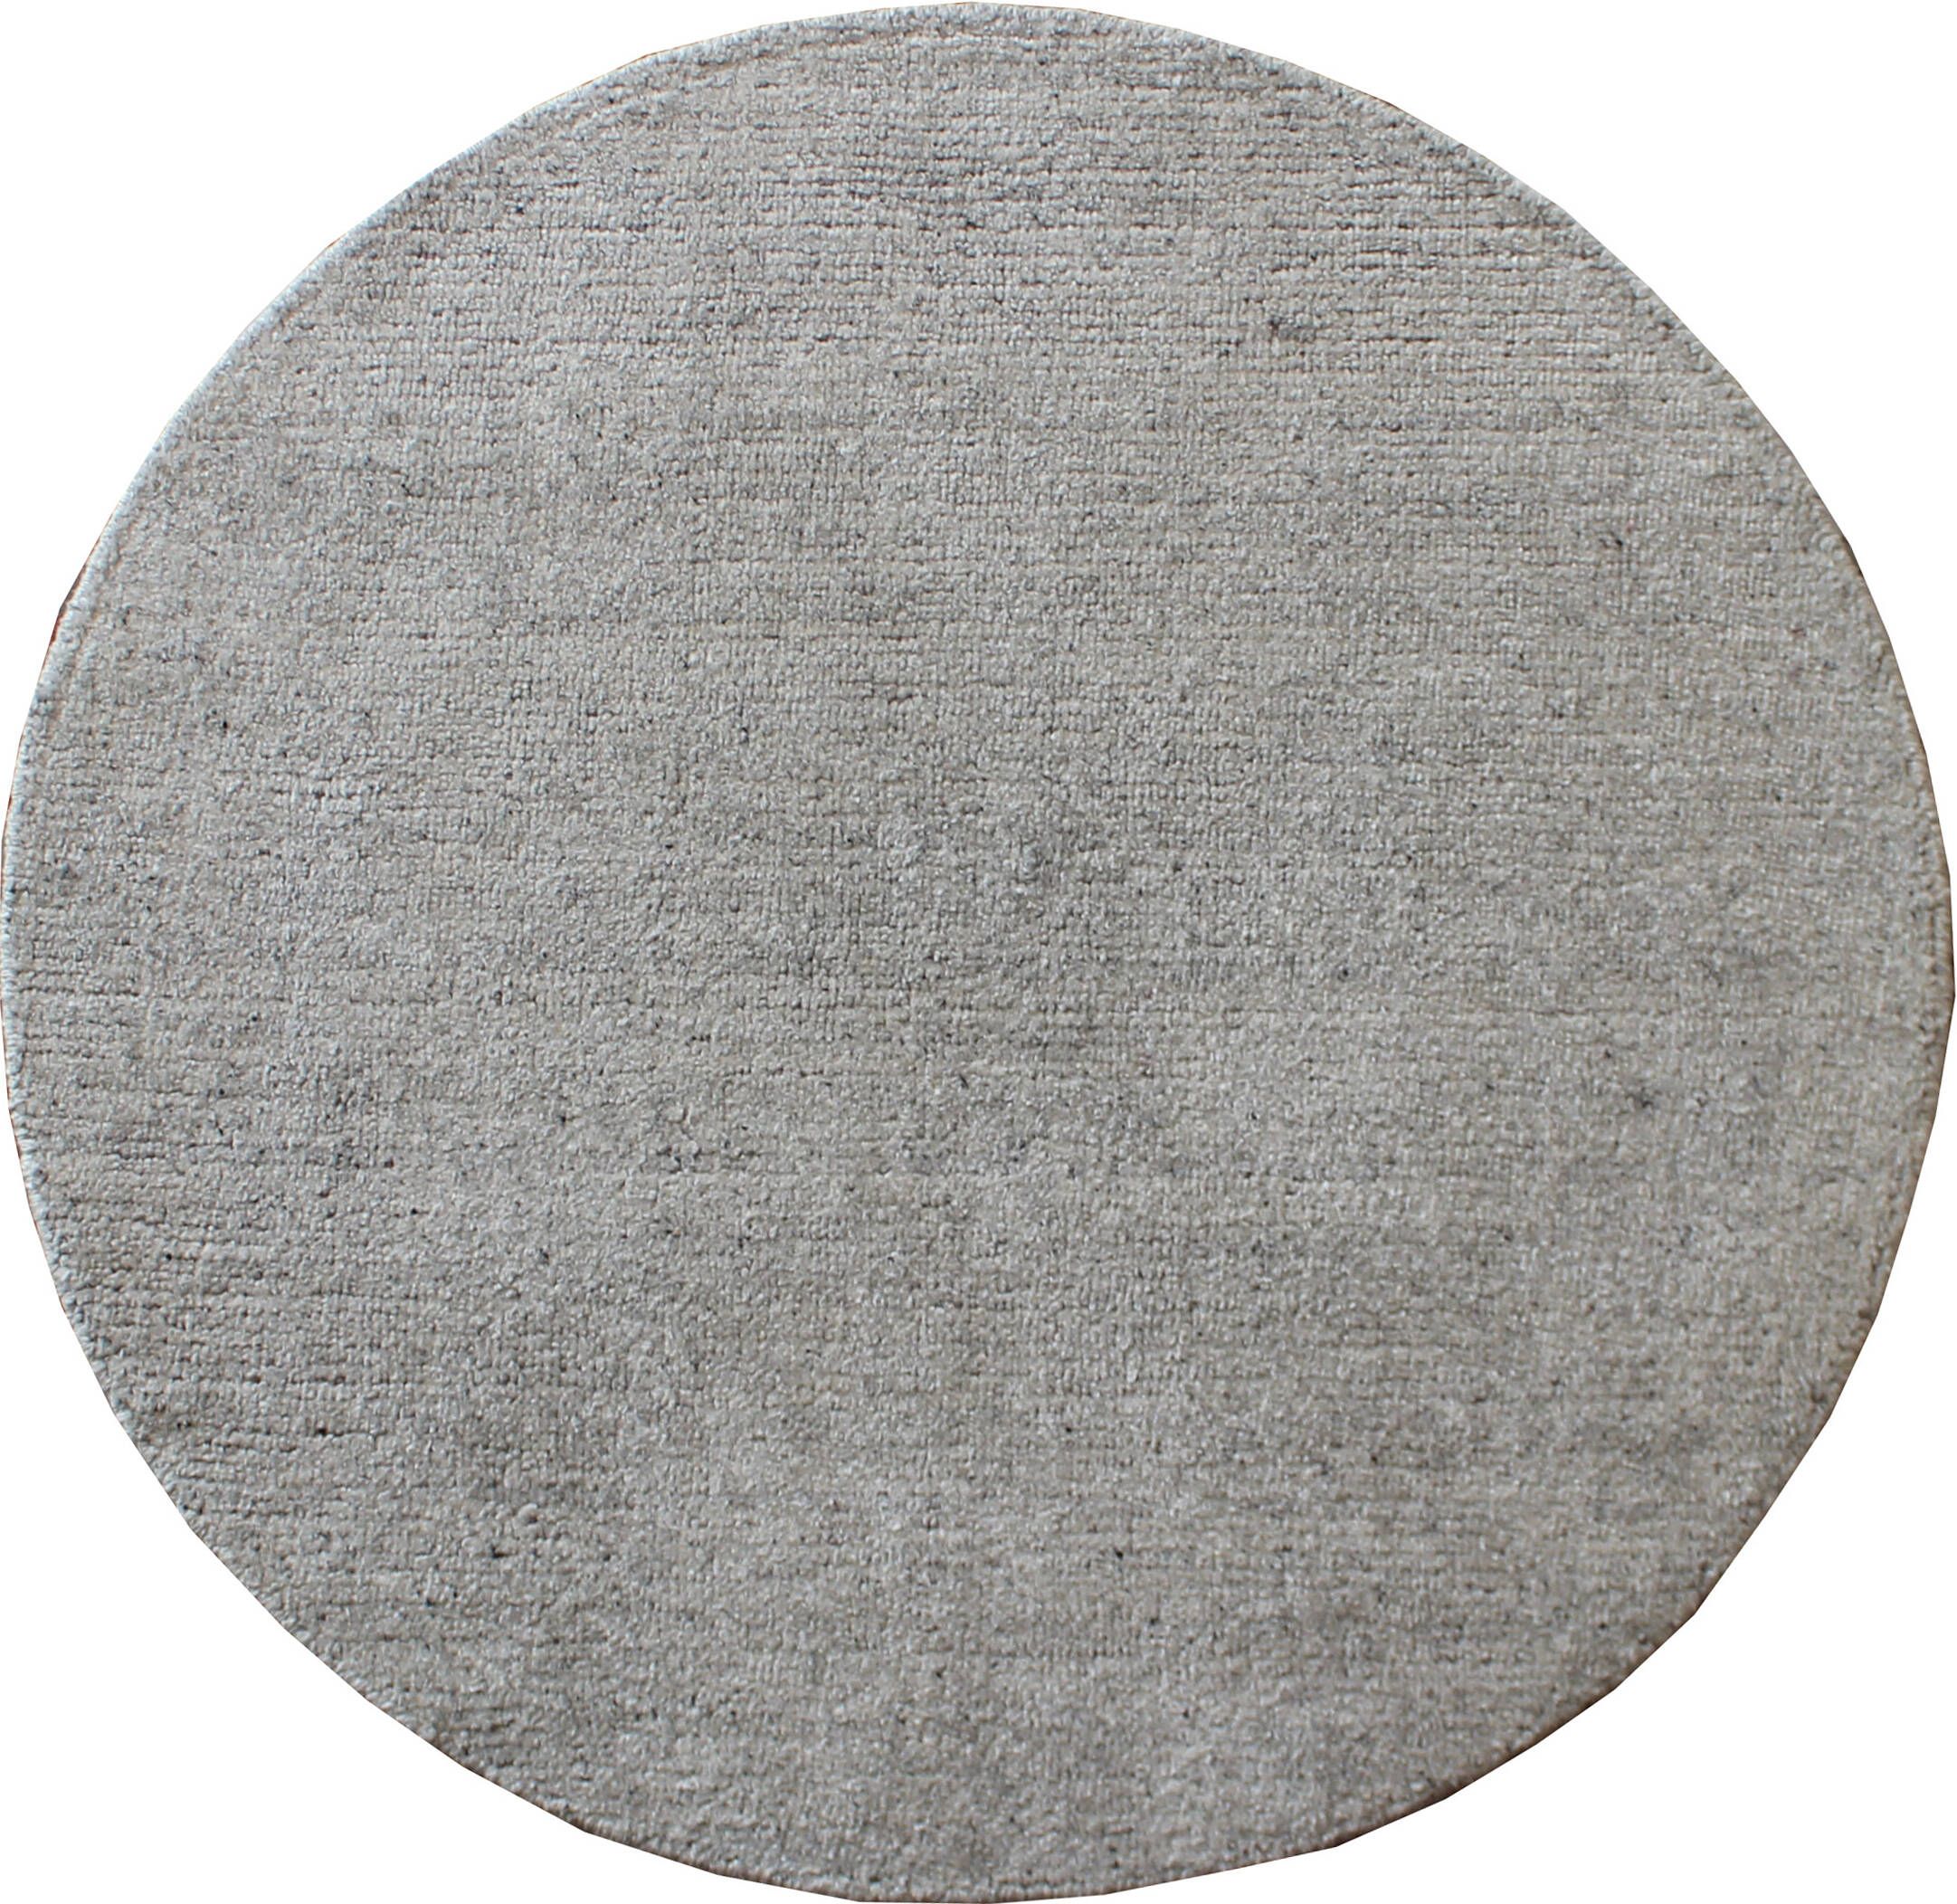 Indian Modern Grey Round 4 Ft And Smaller Bamboo Silk Carpet 137531 | Sku  137531 Within Gray Bamboo Round Rugs (View 2 of 15)